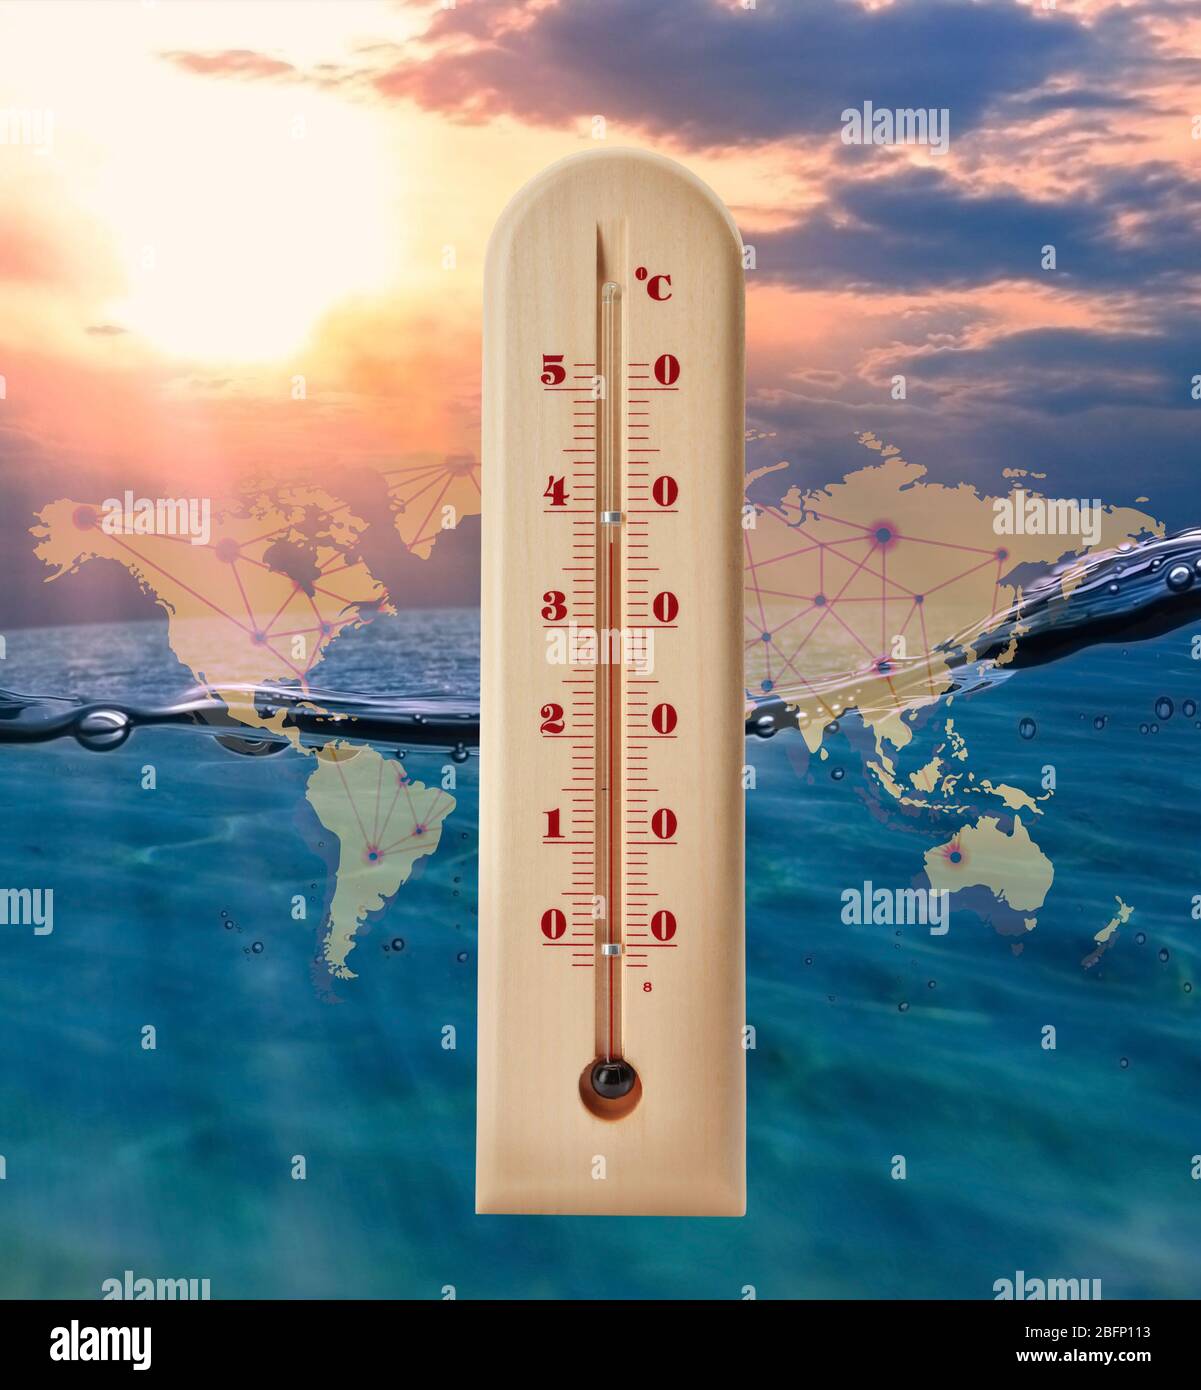 https://c8.alamy.com/comp/2BFP113/world-map-with-thermometer-showing-high-temperature-and-seascape-on-background-concept-of-global-warming-and-climate-change-save-planet-and-environm-2BFP113.jpg